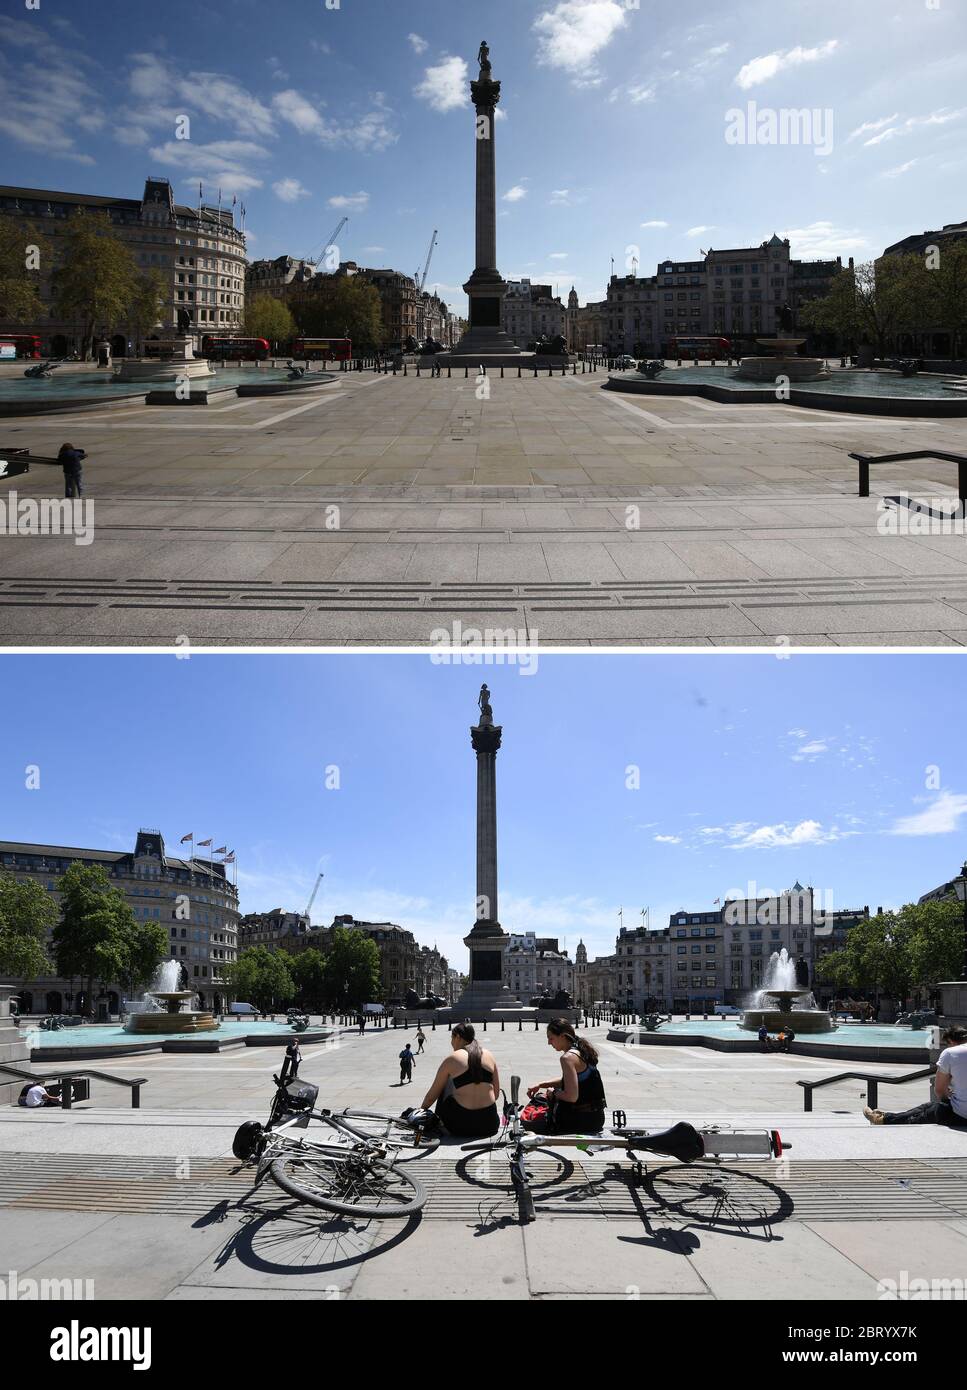 Composite photos of Trafalgar Square, London, on 13/04/20 (top), and today 22/05/20 (bottom), after the introduction of measures to bring the country out of lockdown. Stock Photo